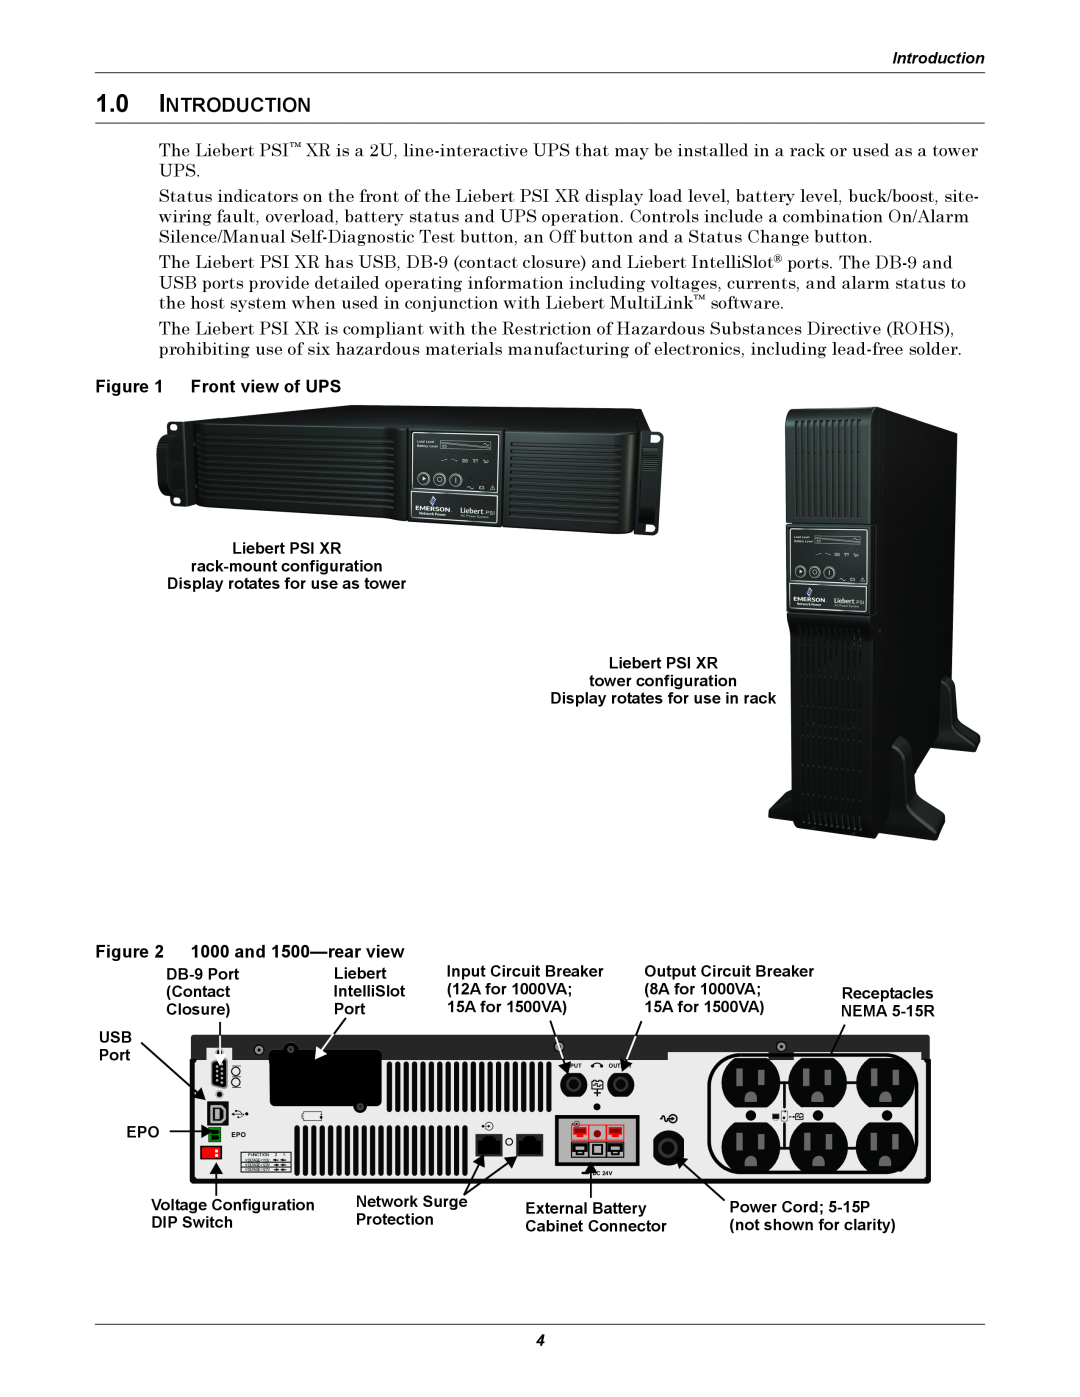 Emerson 3000, 2200 user manual 1.0INTRODUCTION, Front view of UPS, 1000 and 1500—rearview 